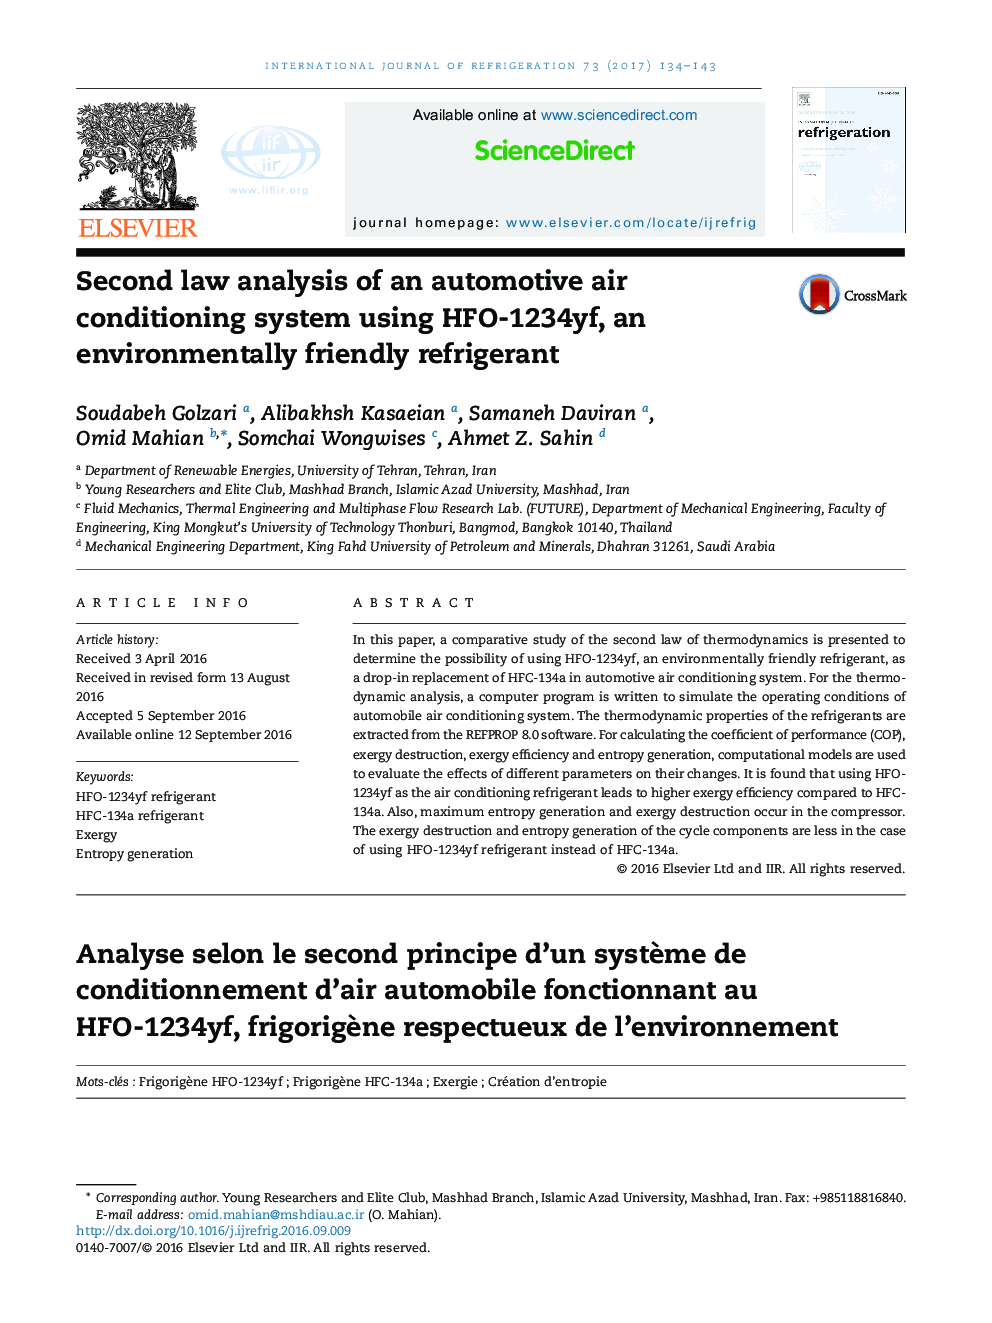 Second law analysis of an automotive air conditioning system using HFO-1234yf, an environmentally friendly refrigerant